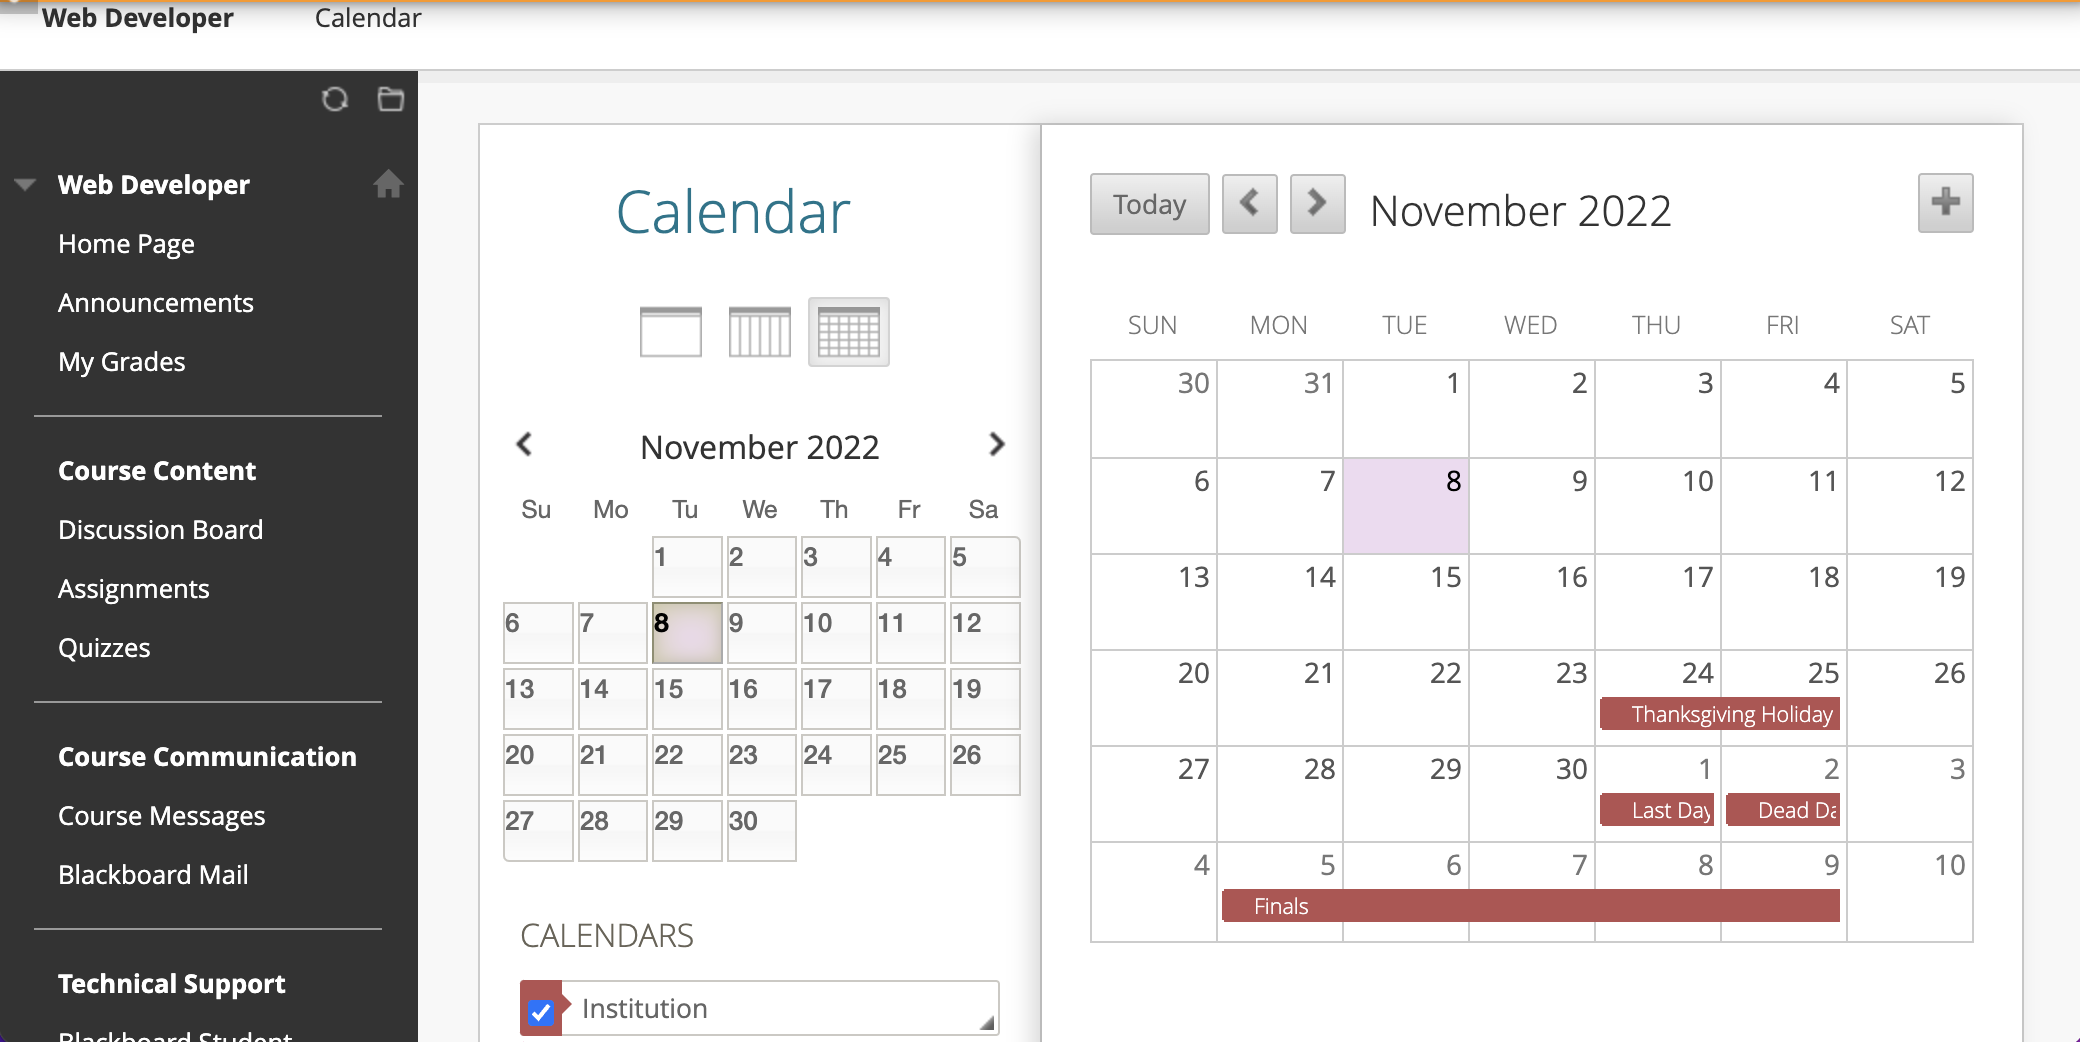 Image of a typical calendar view of the current month and year